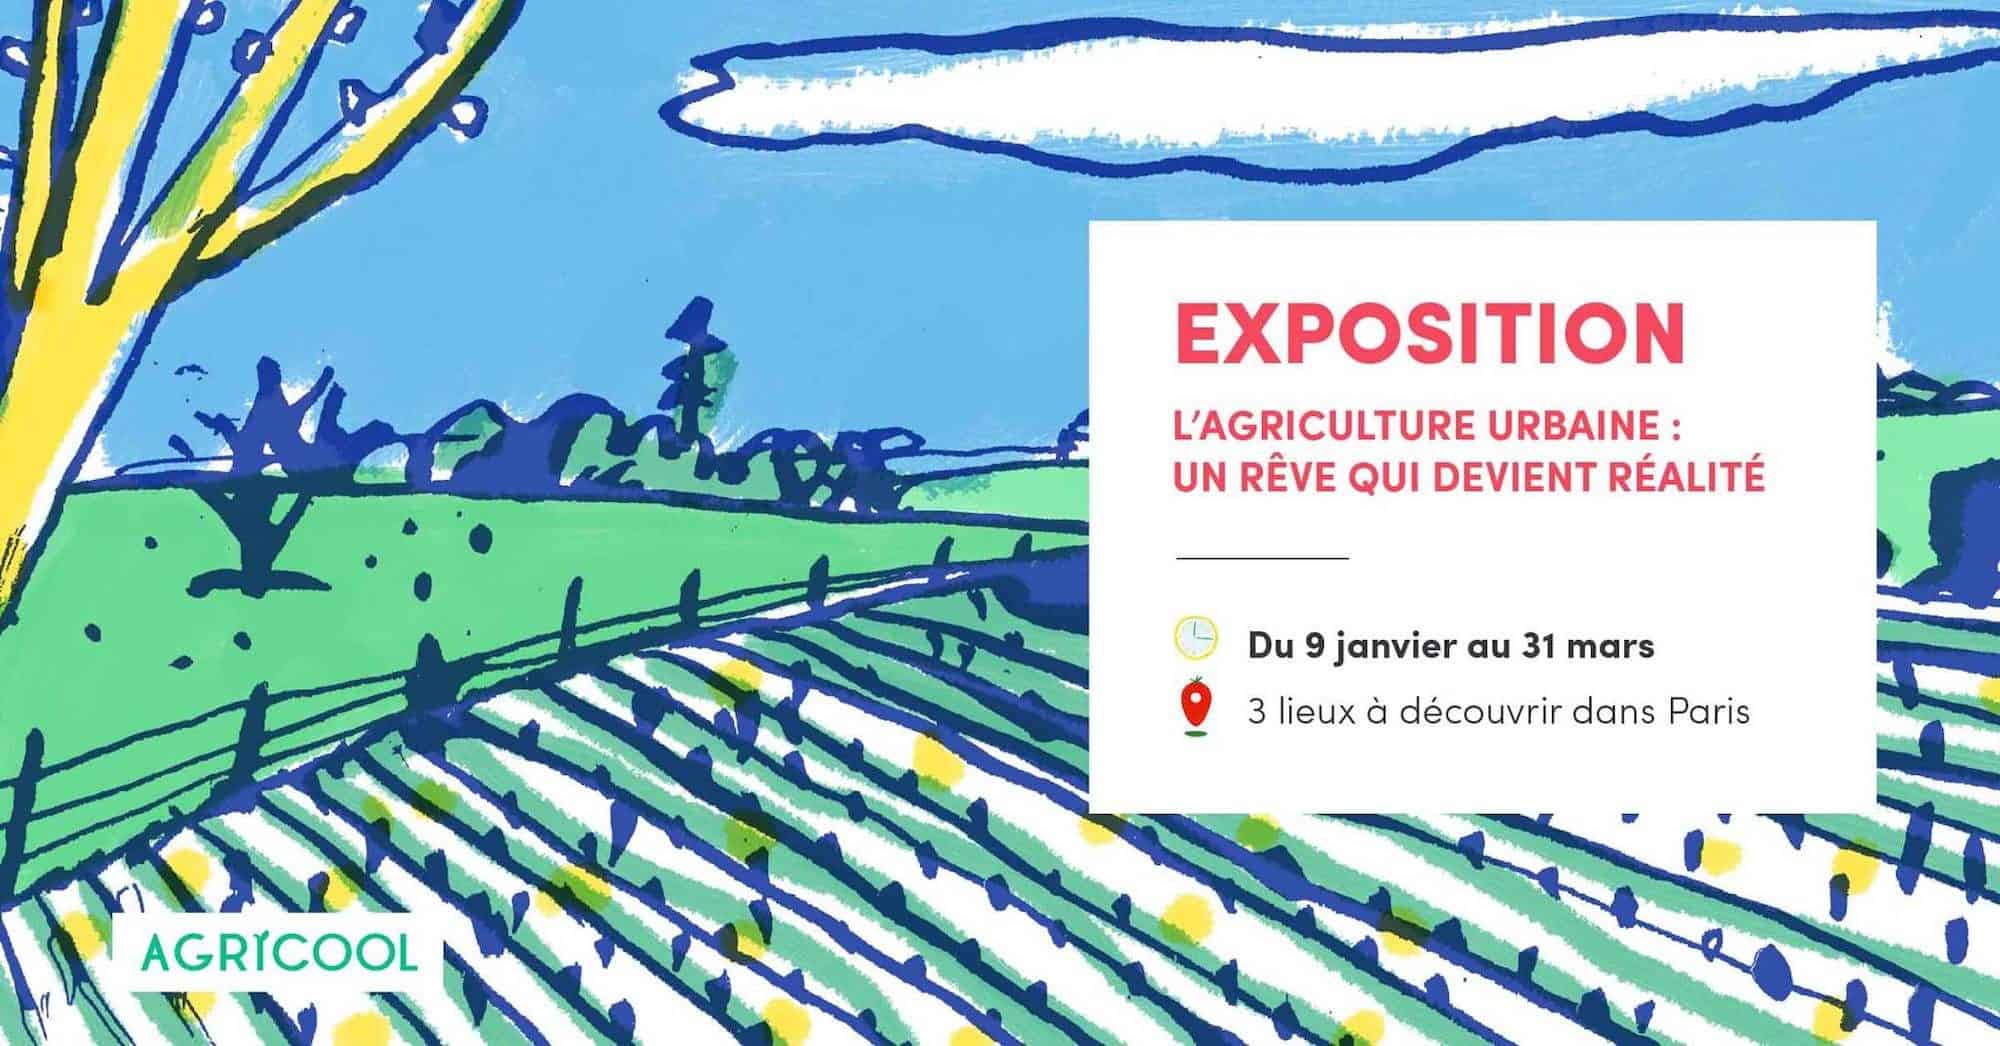 The poster for the Agricool Urban Agriculture Exhibition in Paris from January through March.